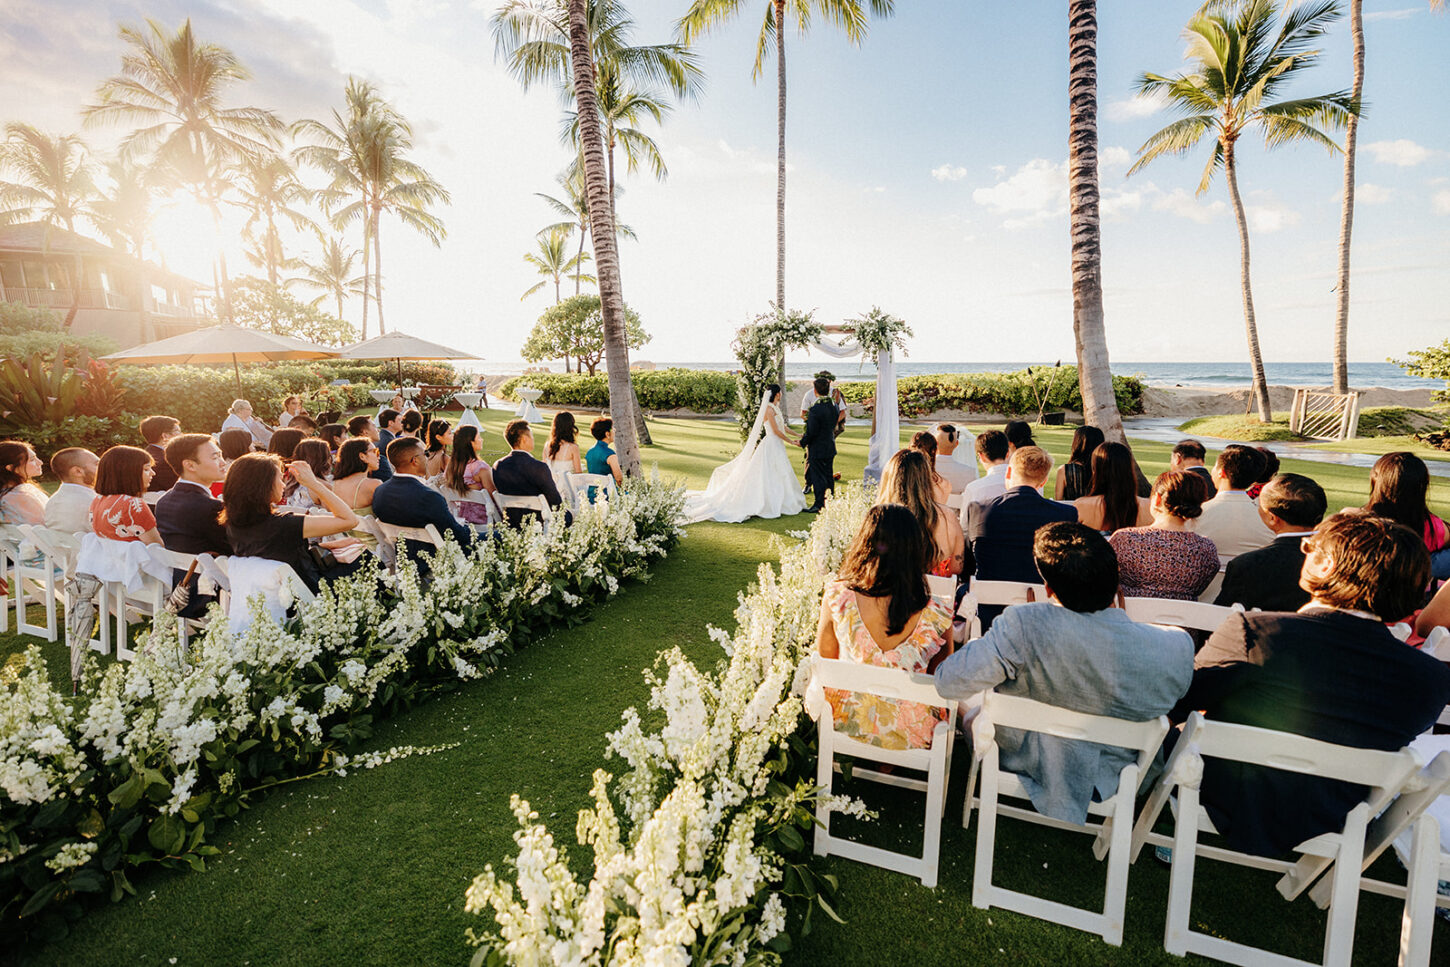 A bride and groom exchanging vows under a floral arch, with lush greenery in the background and the ocean in the distance.